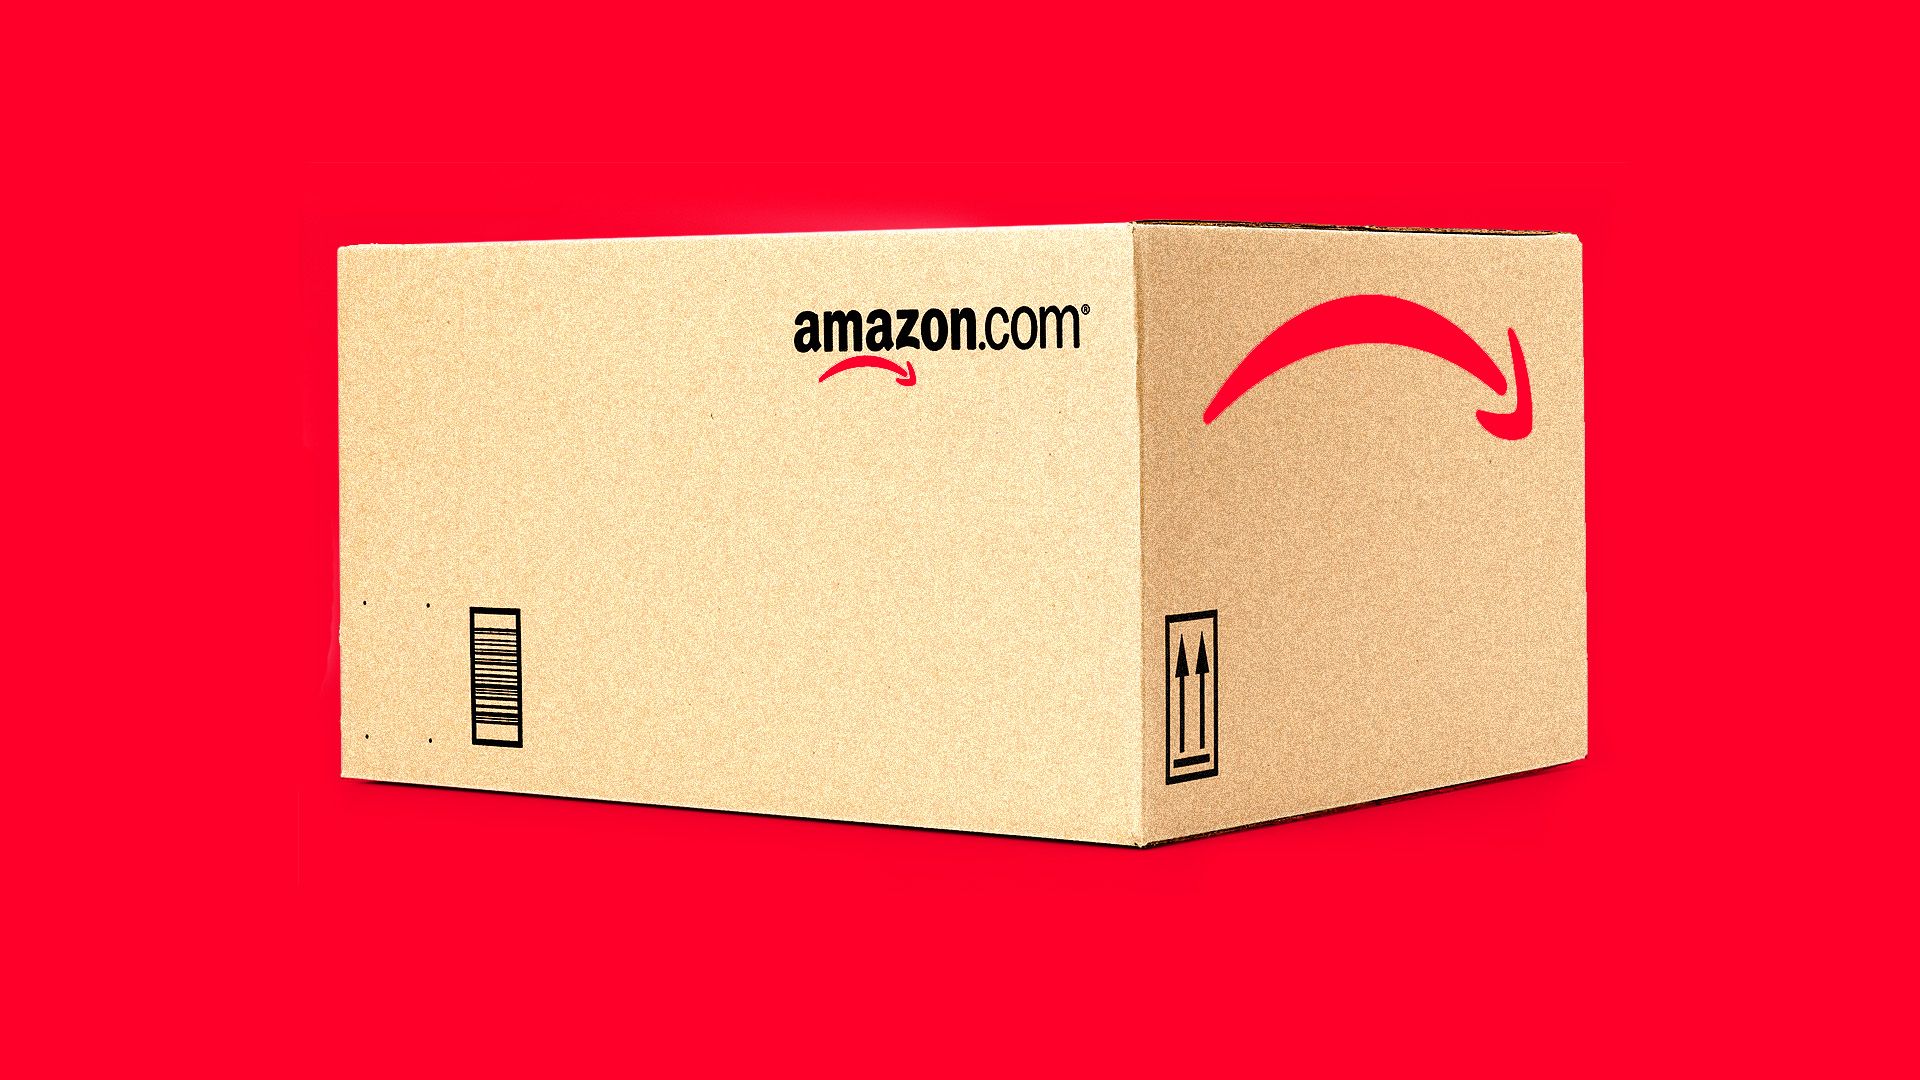 An Amazon box with a red arrow pointing down, against a red backdrop